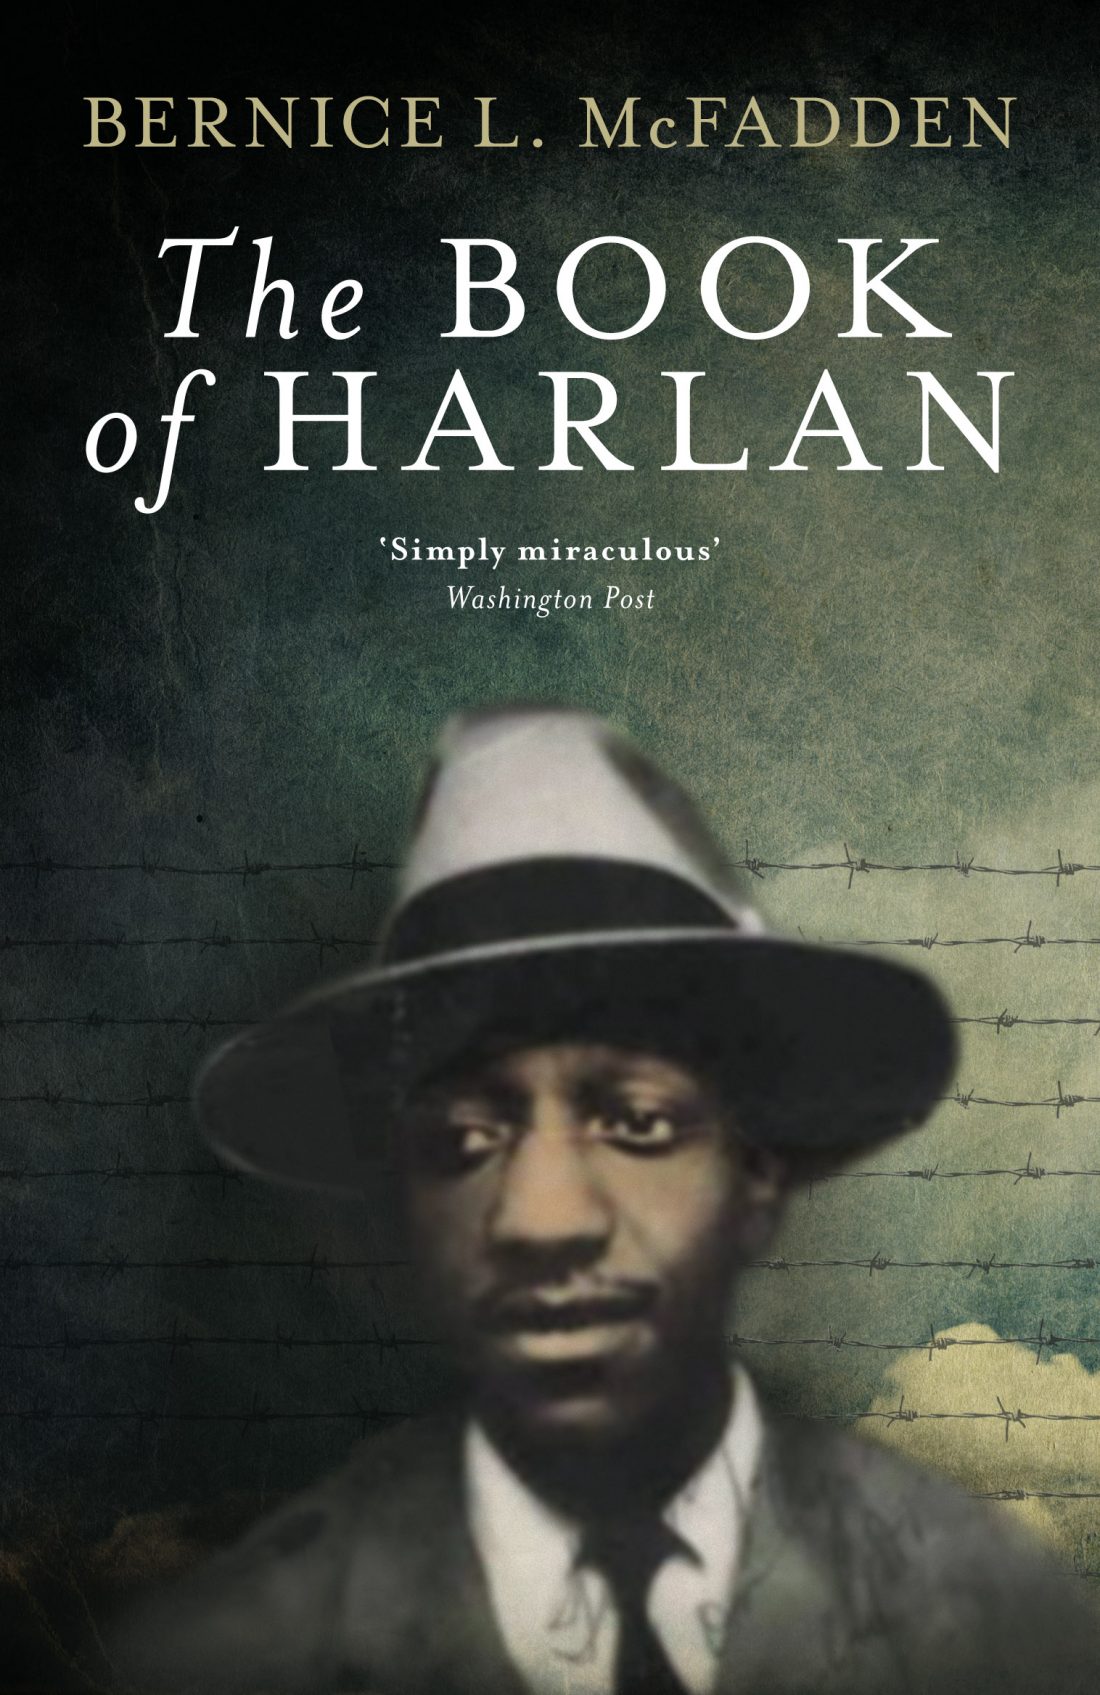 Book of the week: The Book of Harlan